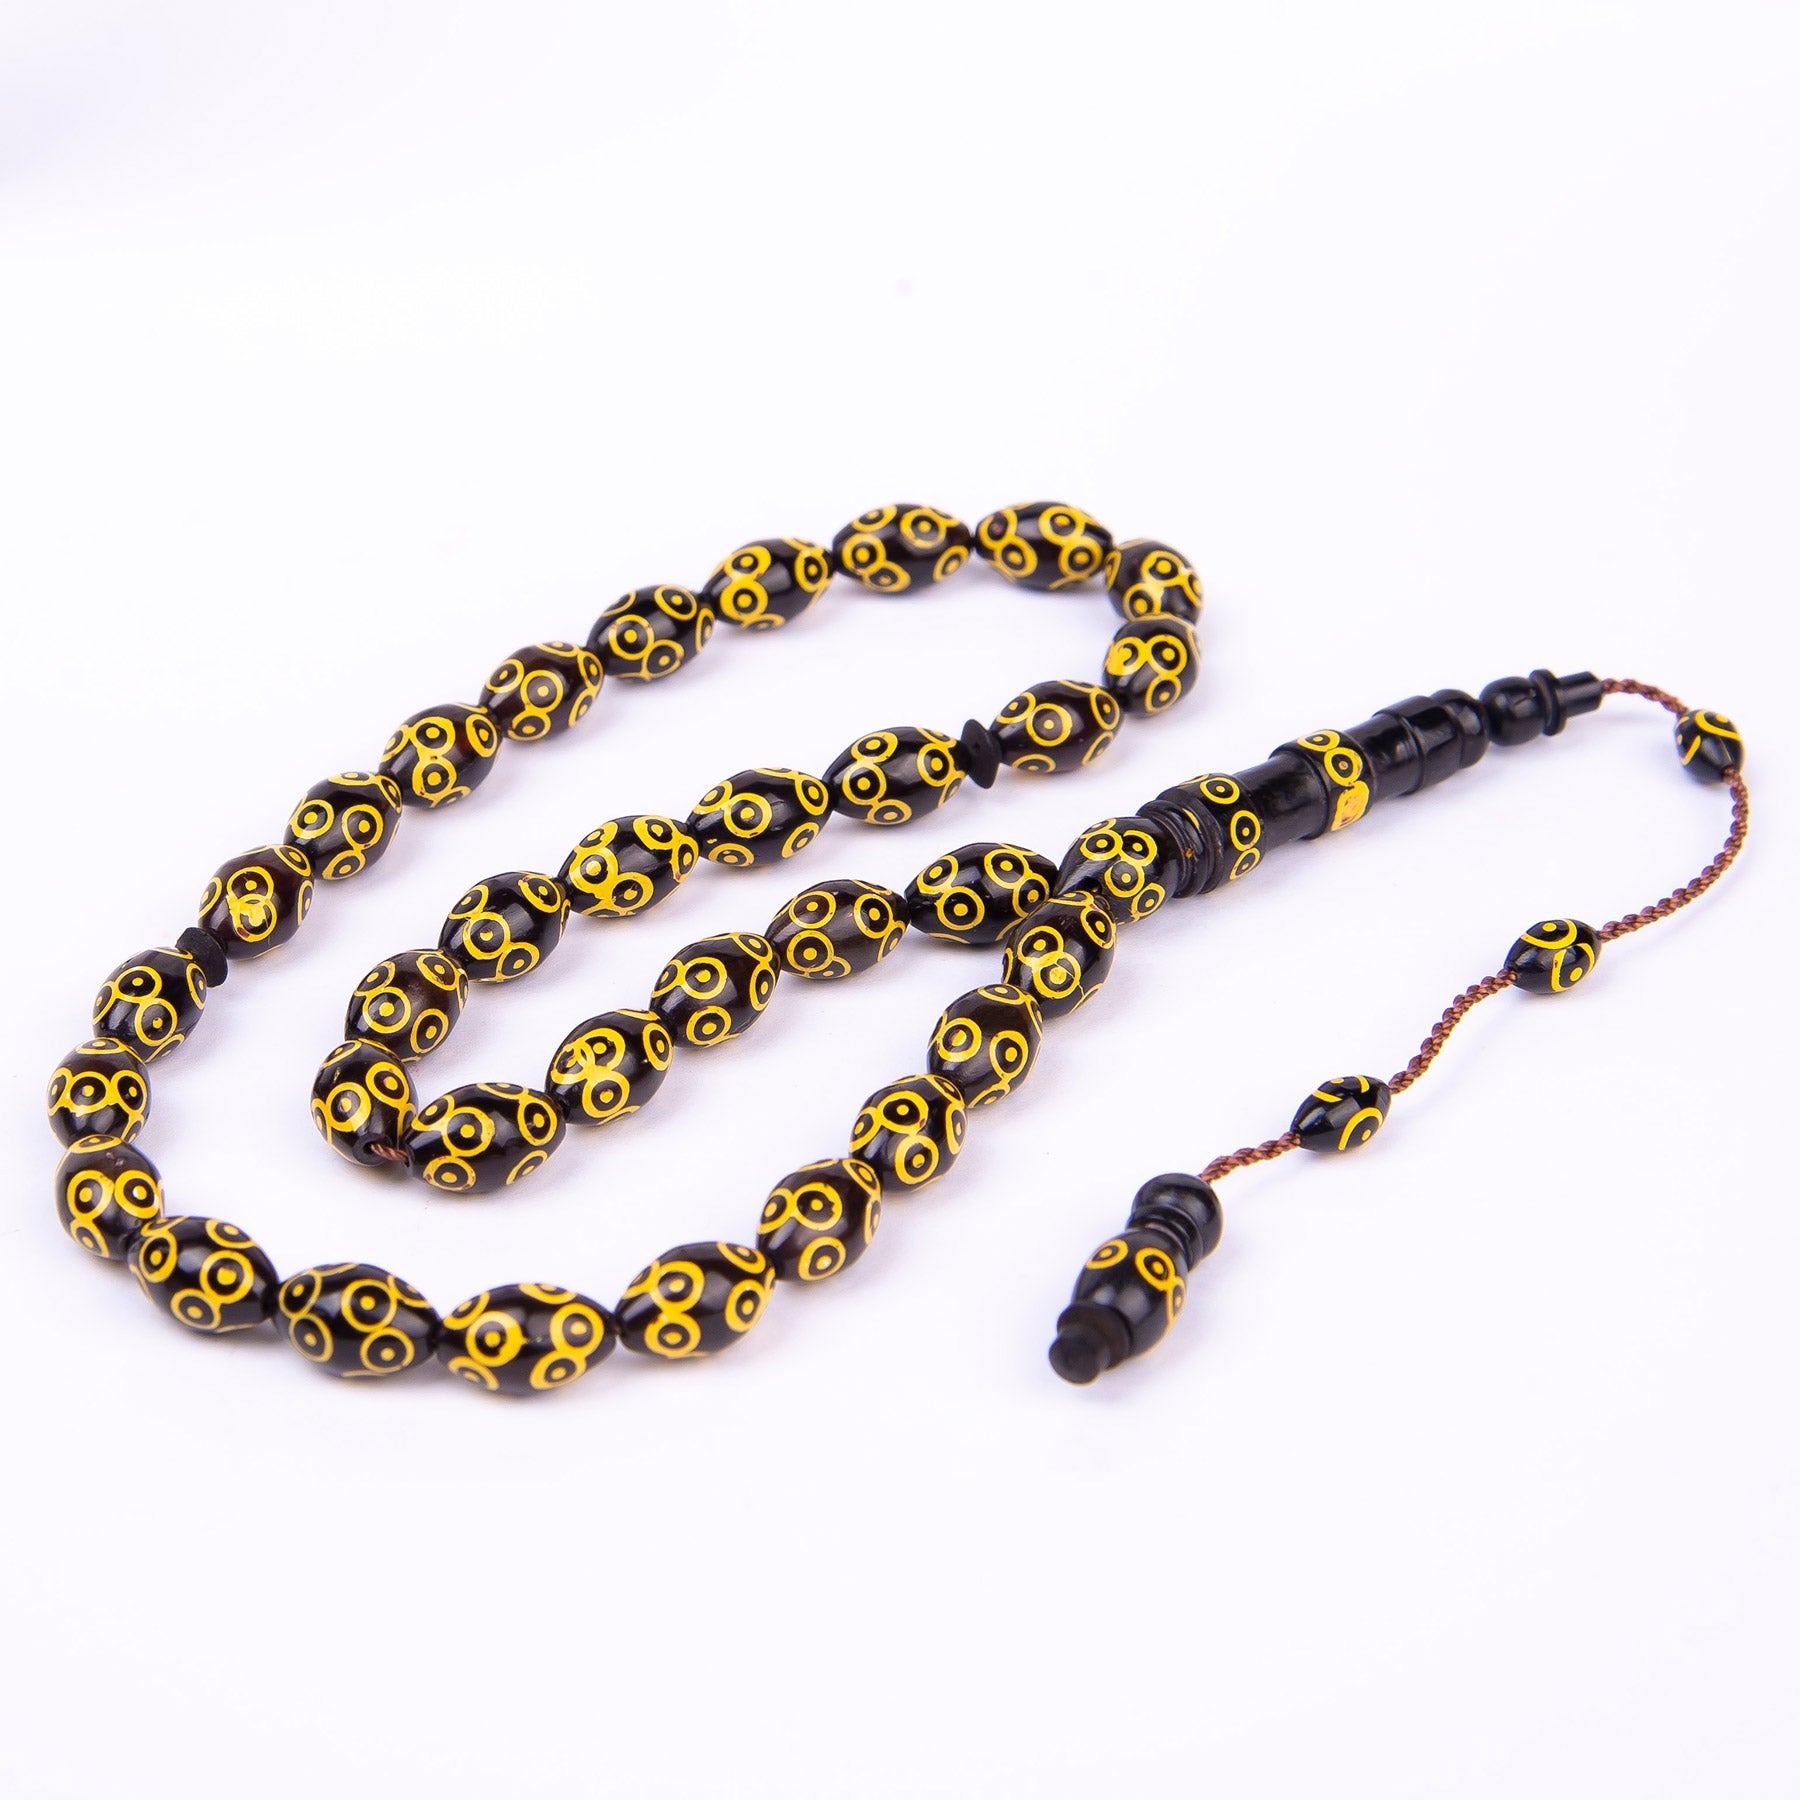 Systematic Solid Cut Embroidered Ebony Wood Prayer Beads 3